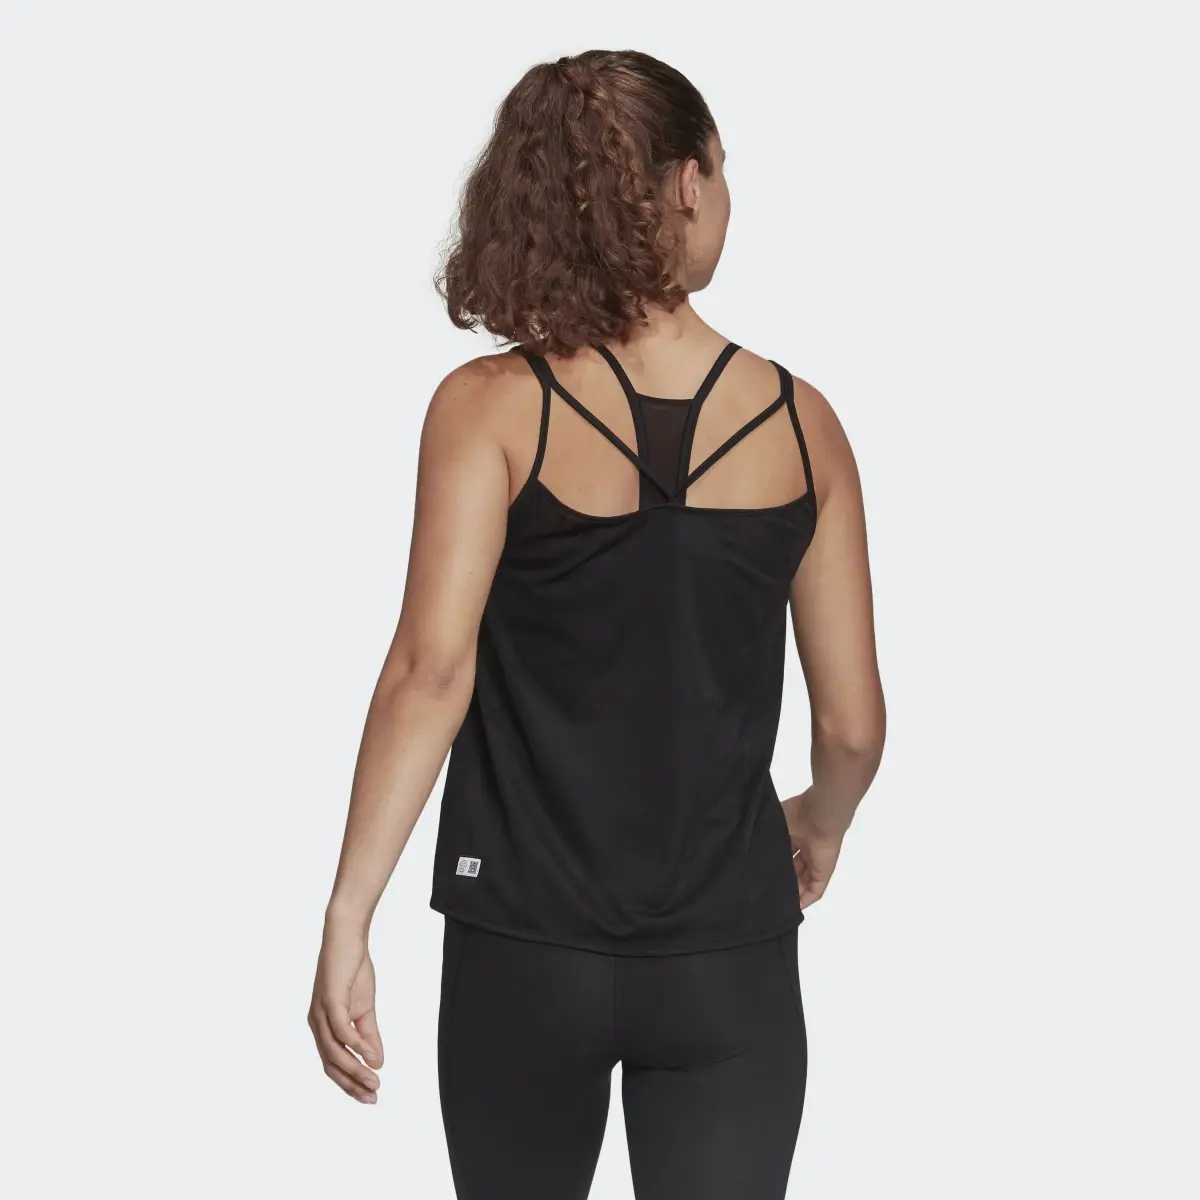 Adidas Made To Be Remade Running Tank Top. 3